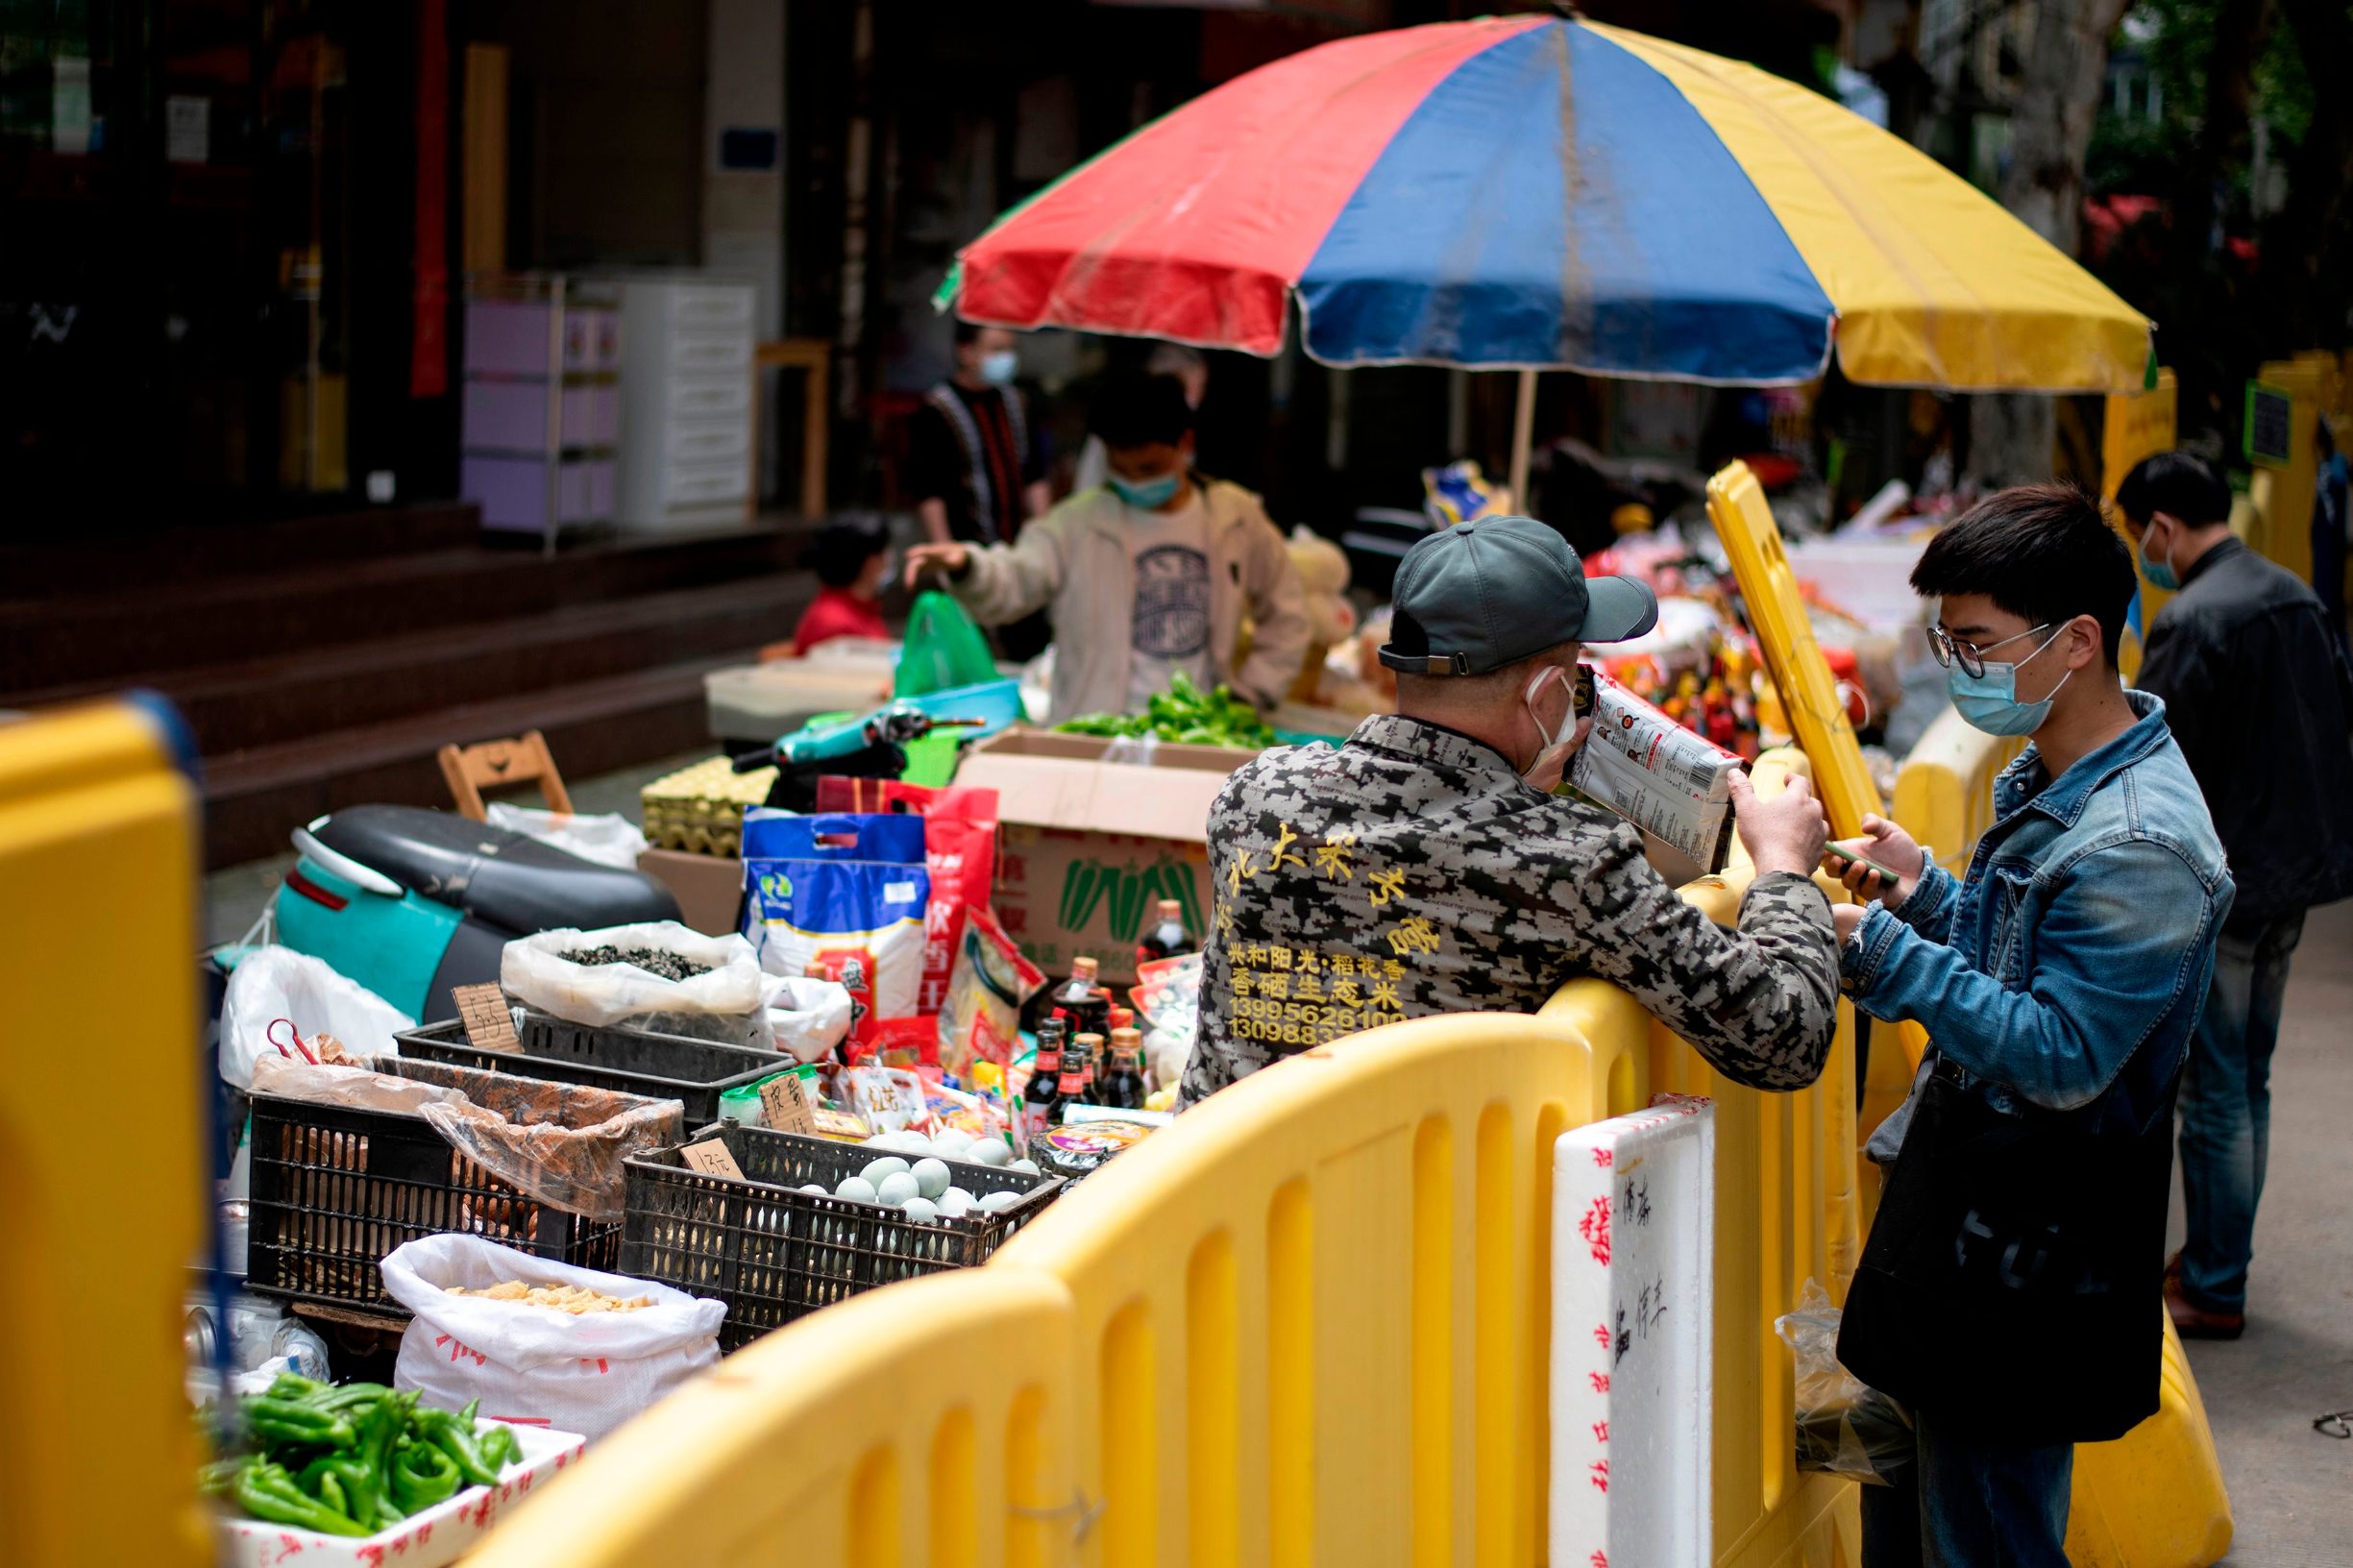 A man (R) wearing a face mask buys goods from a vendor on the other side of a barricaded residential compound in Wuhan in China's central Hubei province on April 14, 2020. (Photo by NOEL CELIS / AFP)